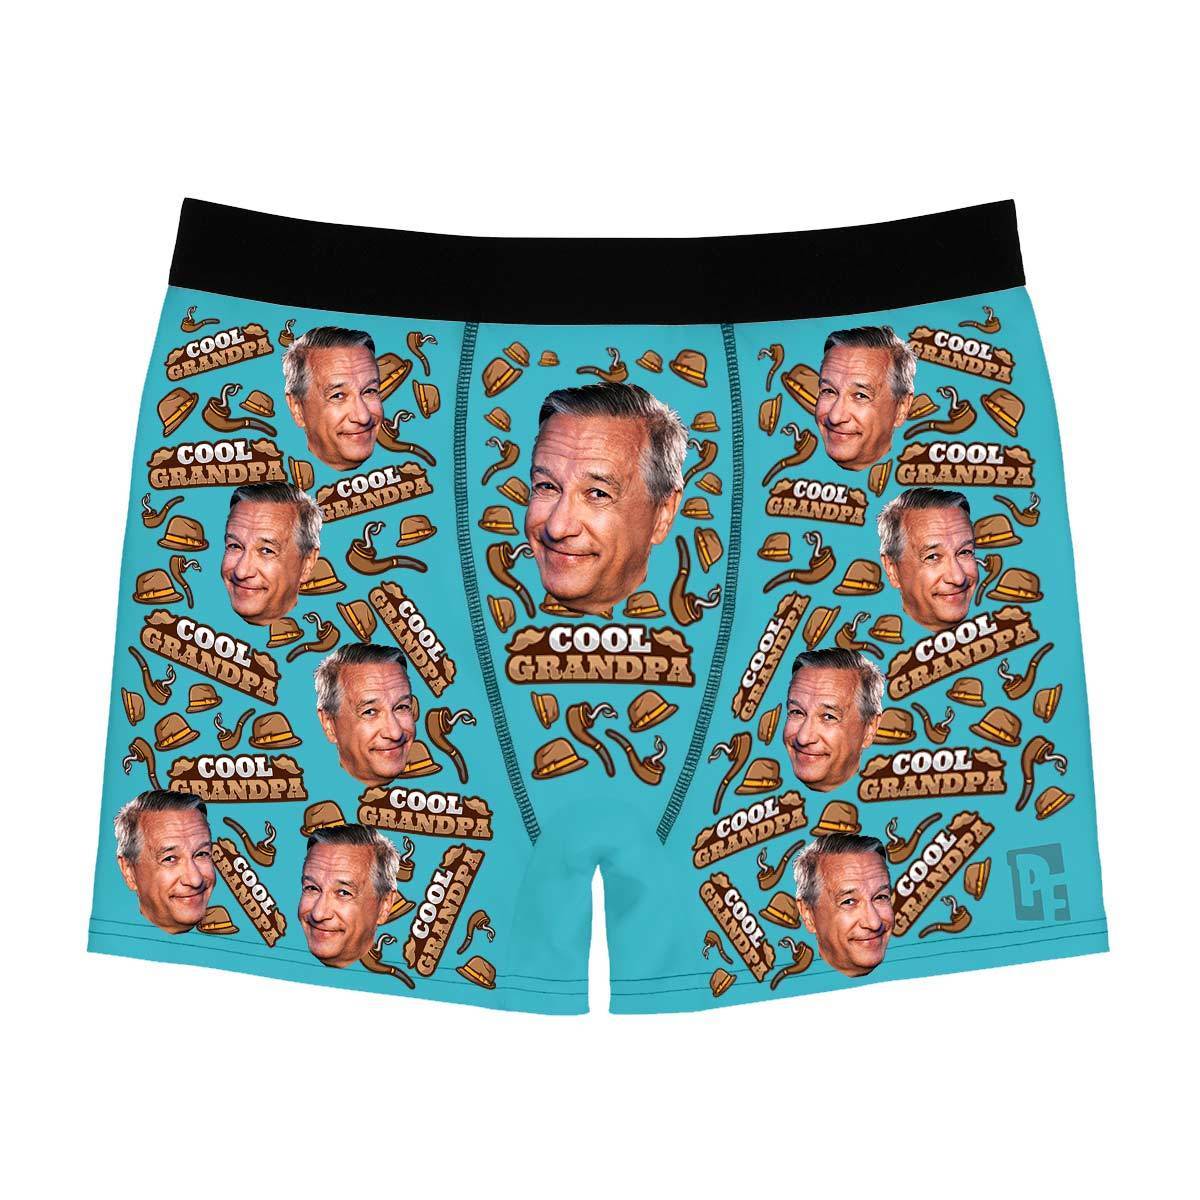 Blue Cool Grandfather men's boxer briefs personalized with photo printed on them